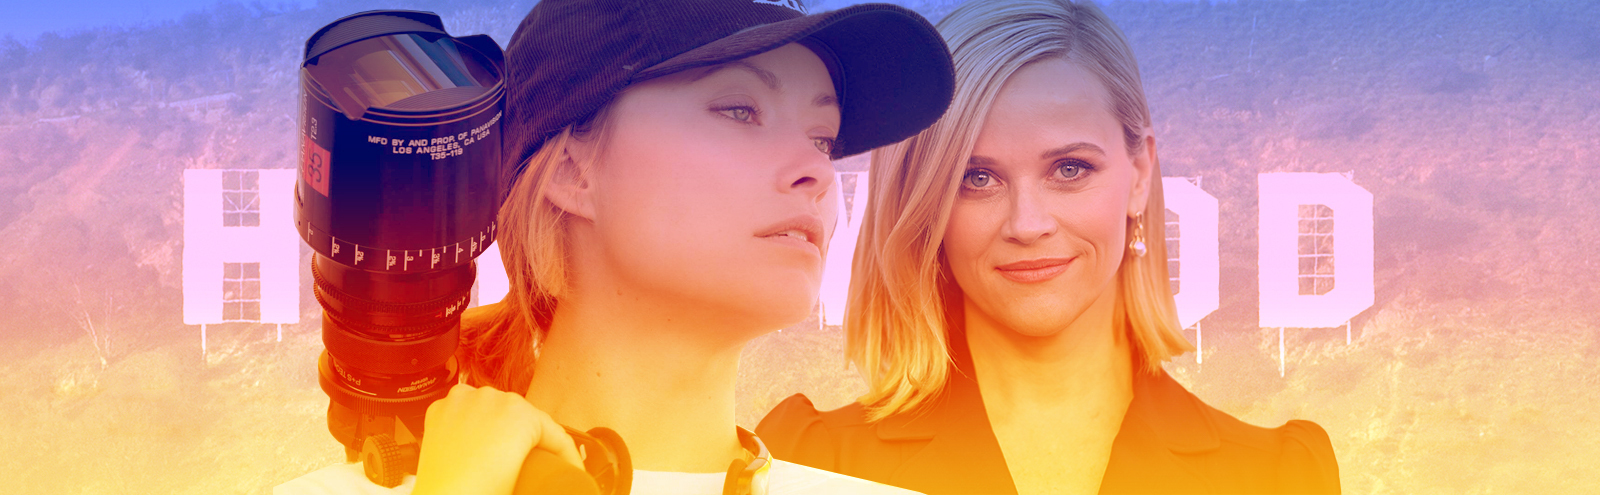 Olivia Wilde, Reese Witherspoon And The Women In Hollywood Finally Telling Their Own Stories